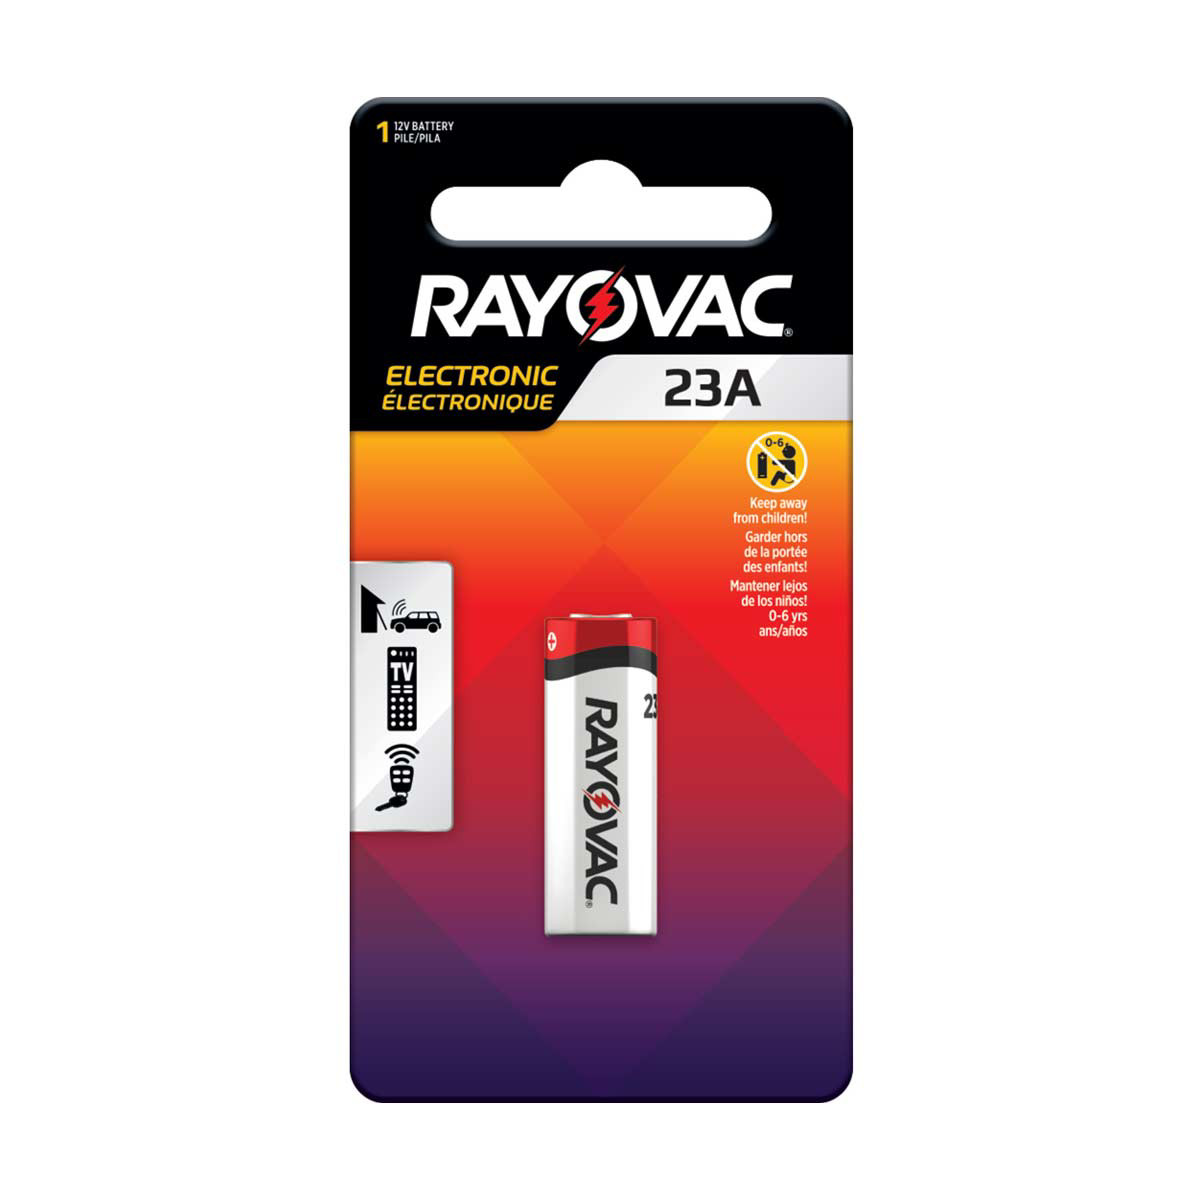 Rayovac Size 23A 12V Electronic Alkaline Batteries, 1 Pack